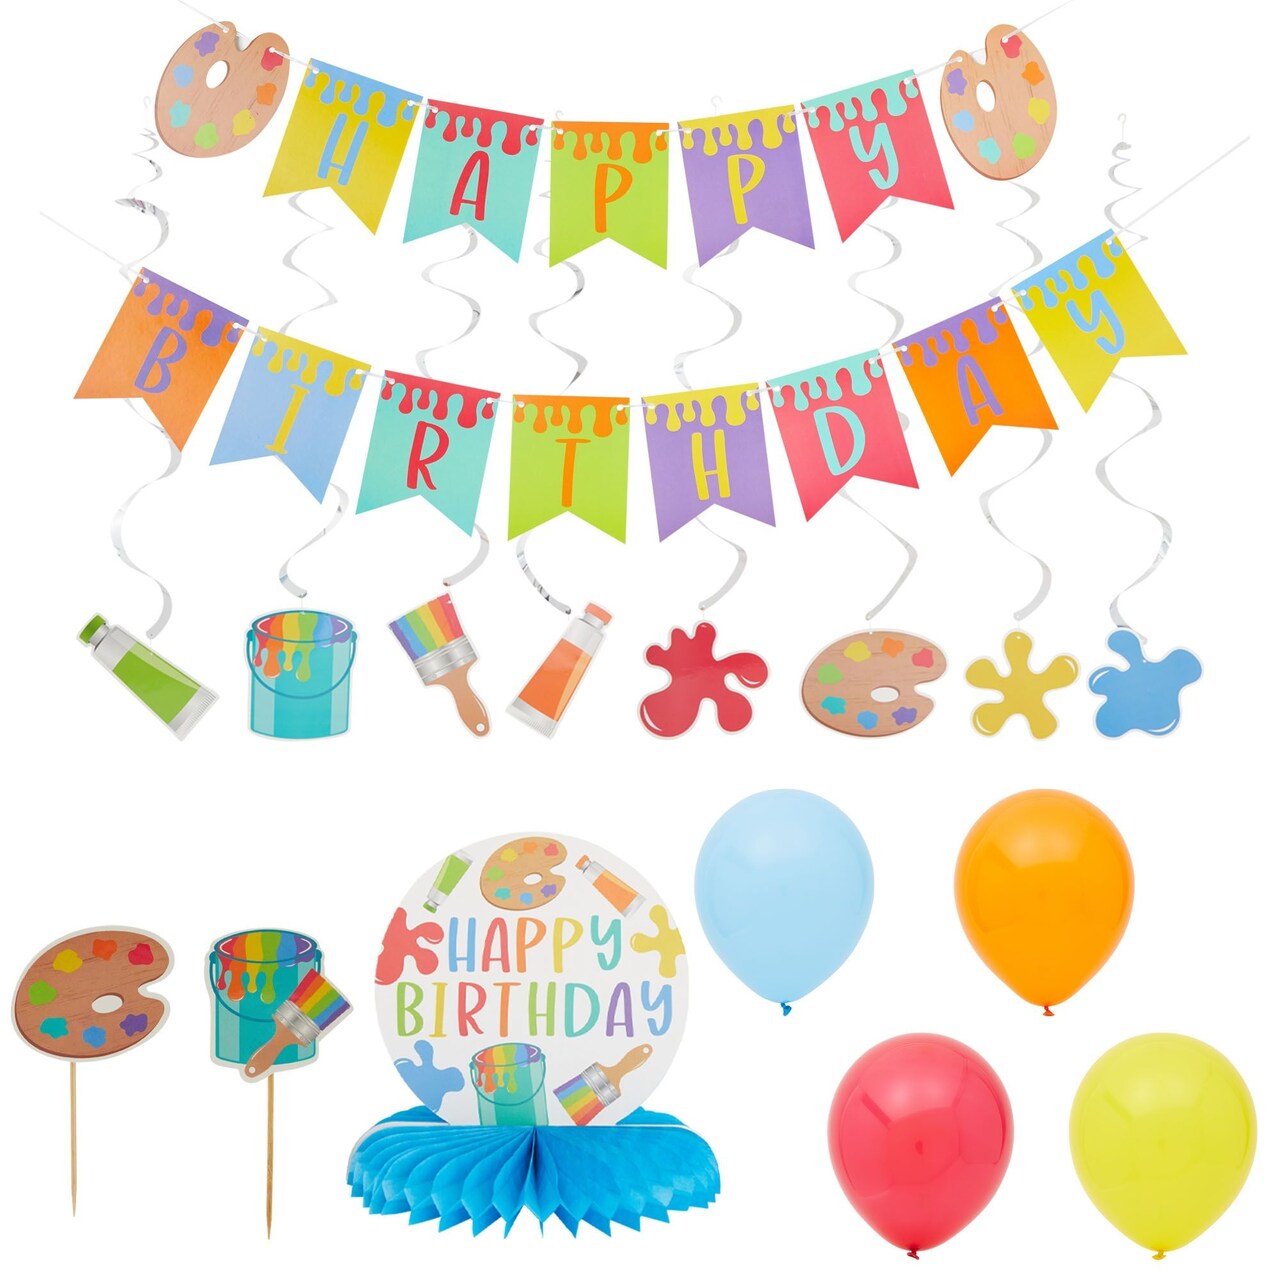 59 Piece Art Birthday Party Decorations Kit with Balloons, Banner, Swirl  Cutouts, Honeycomb Table Centerpieces